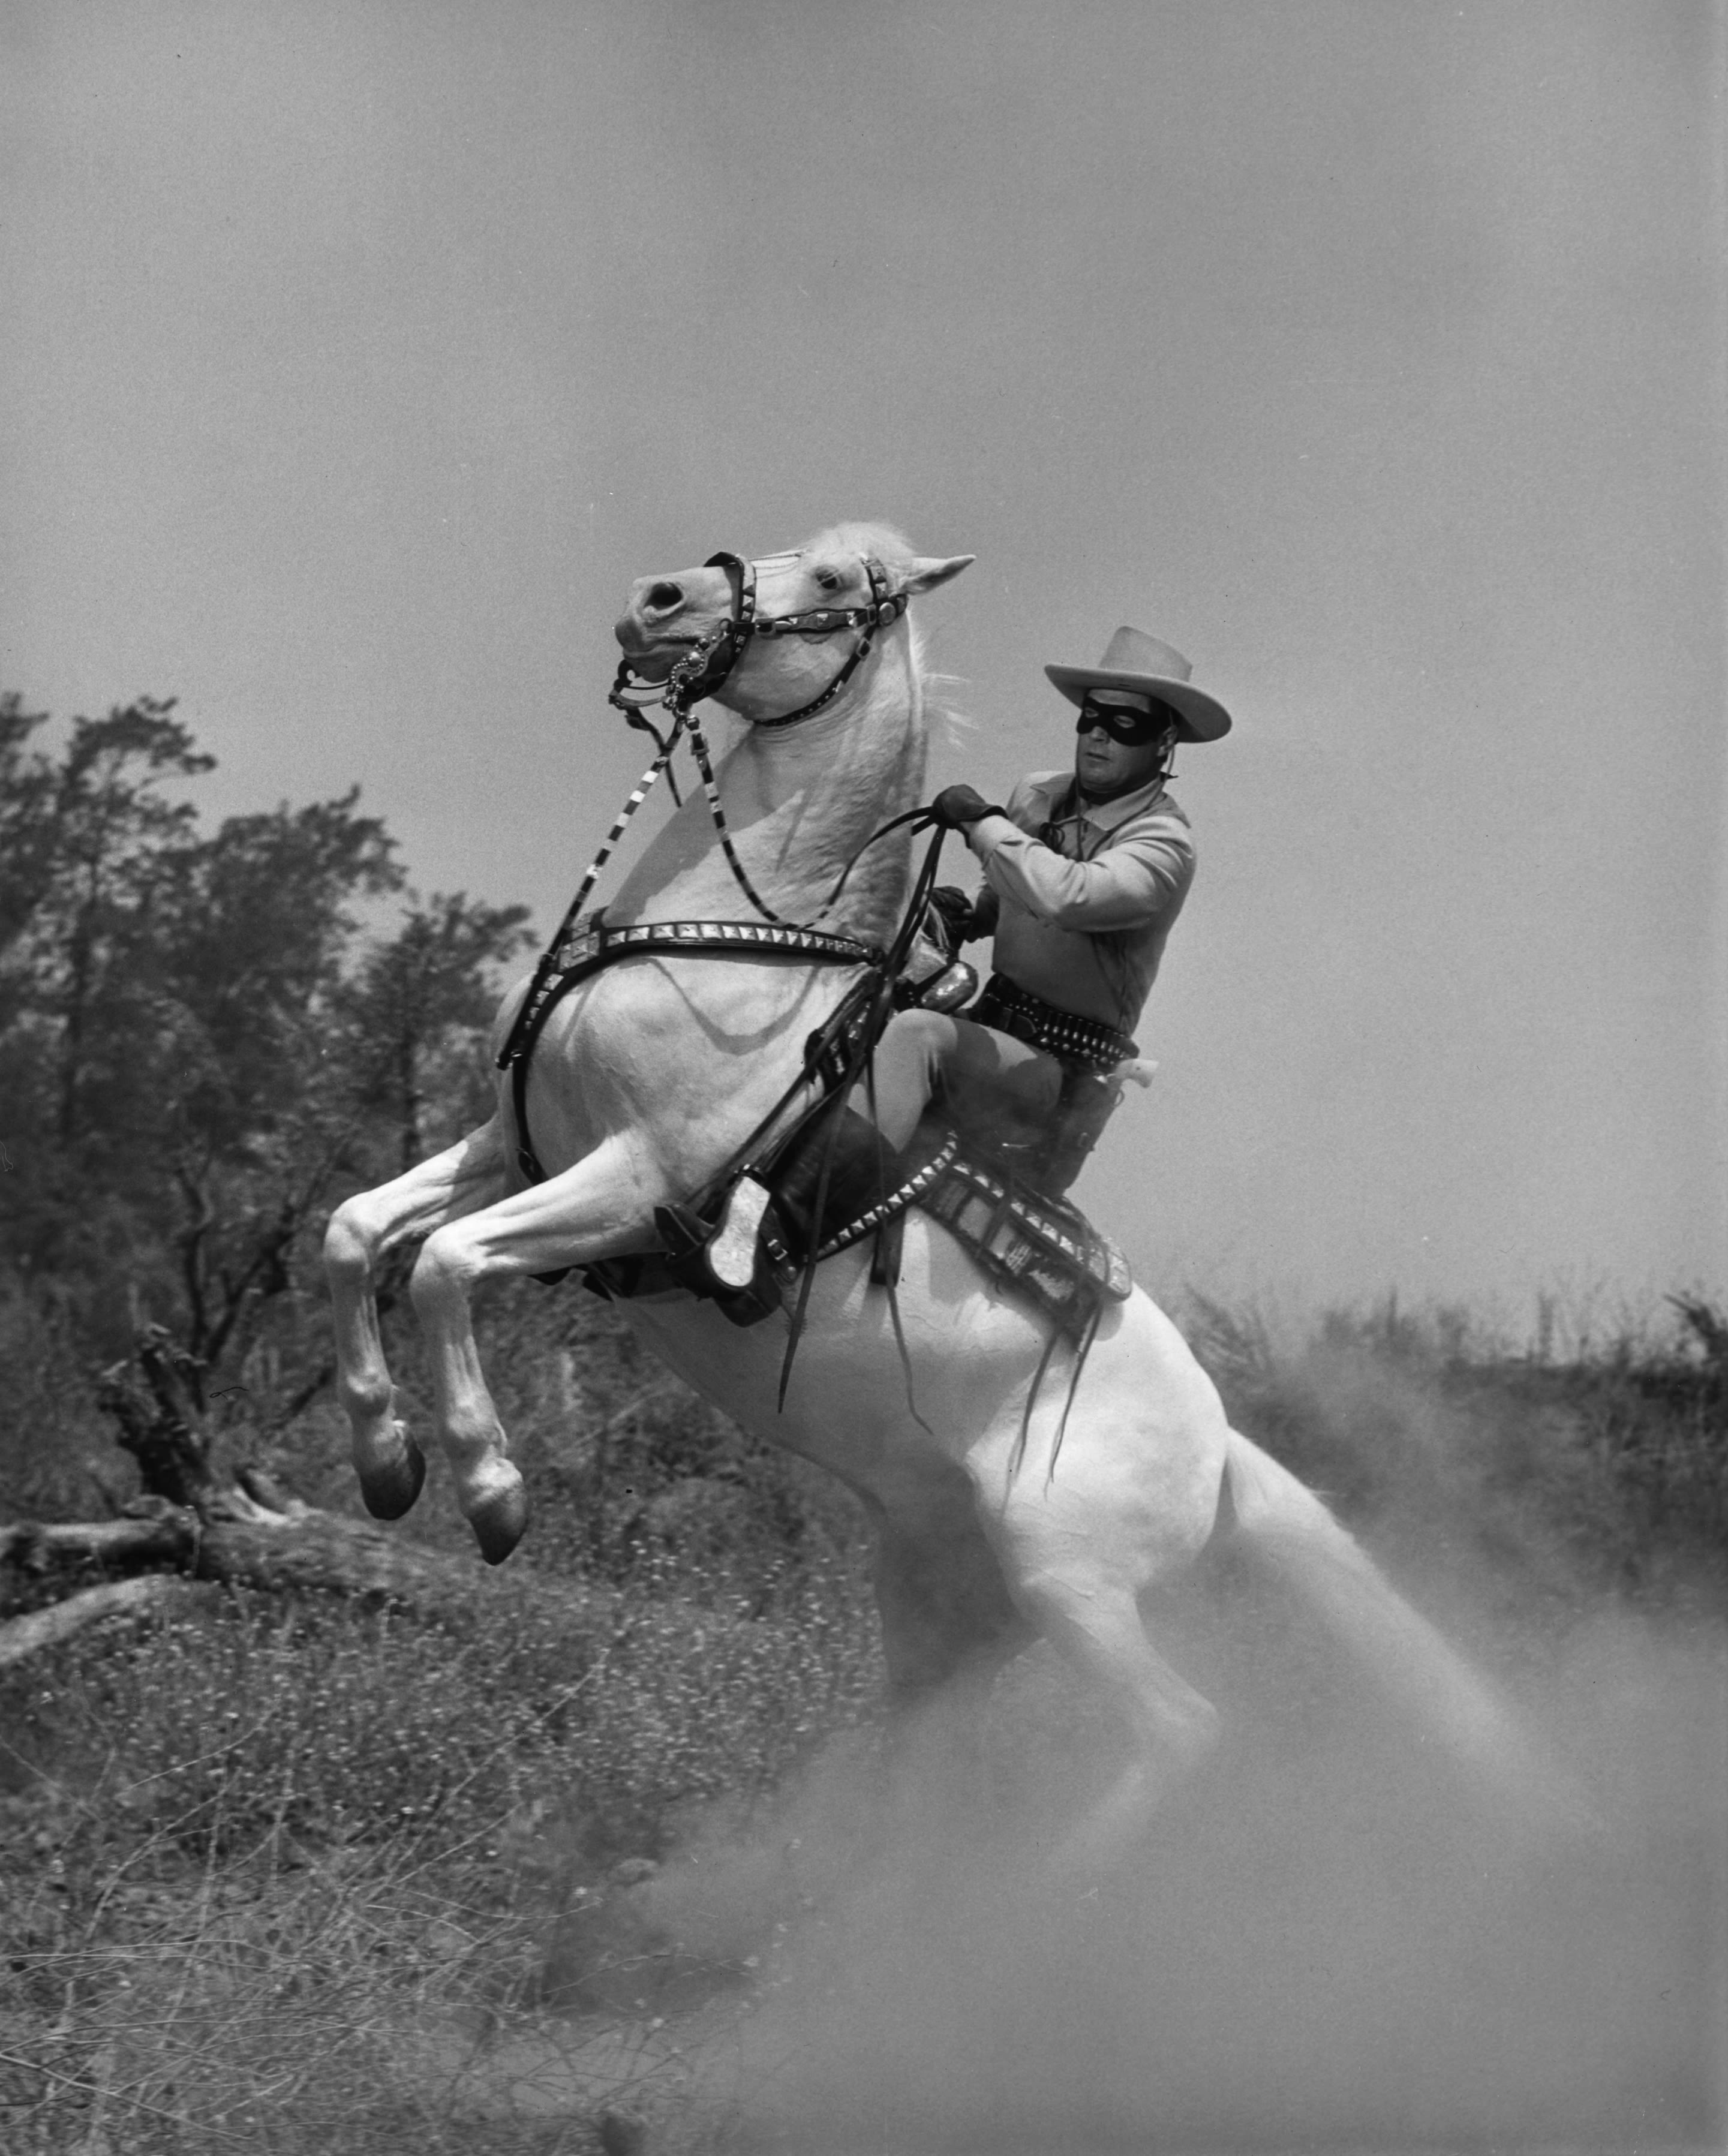 Police History: Who was the real Lone Ranger?